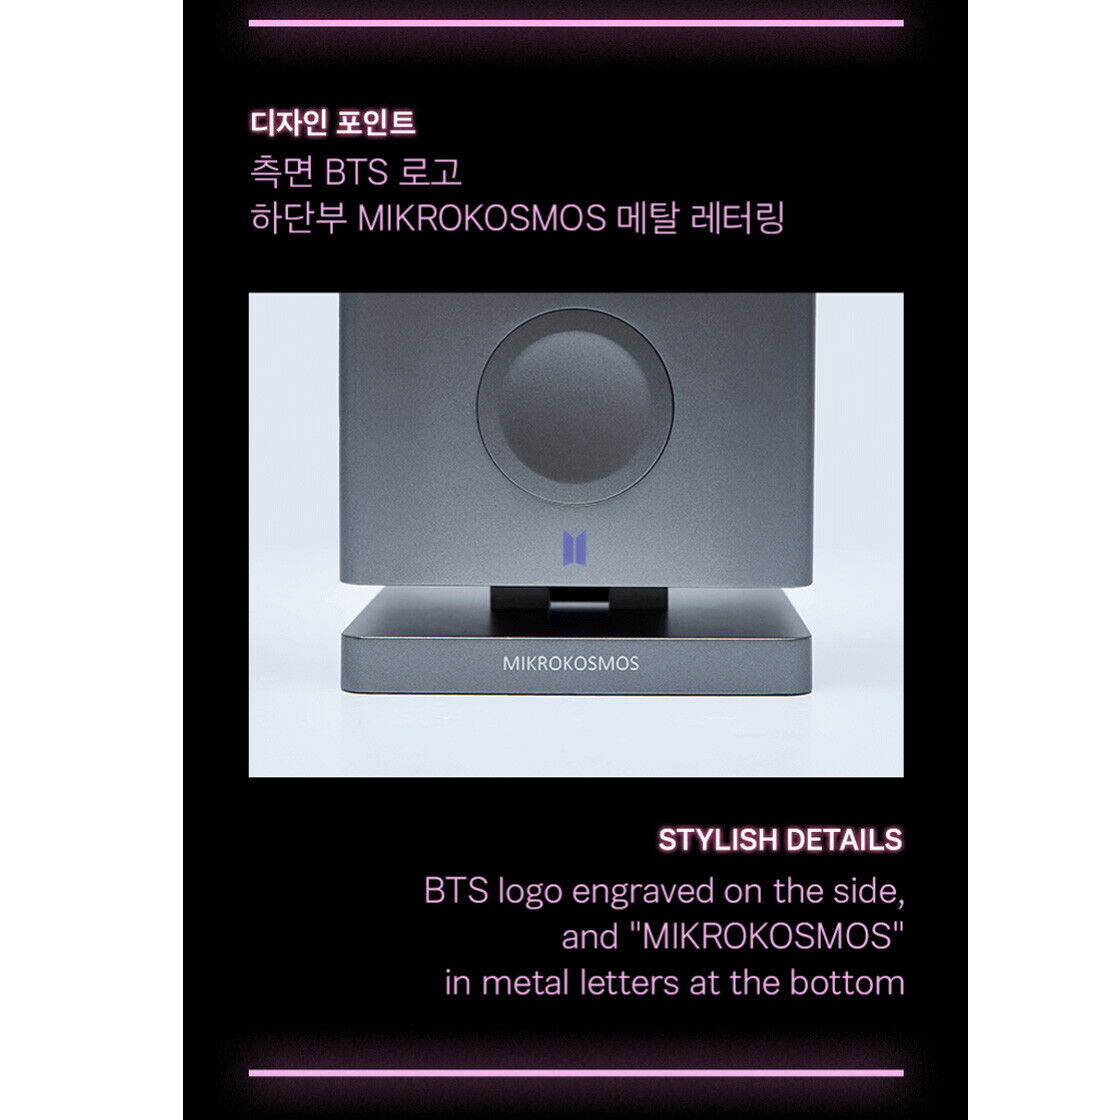 BTS Artist Made Collection by Jungkook Mikrokosmos Mood Lamp w/ PC 